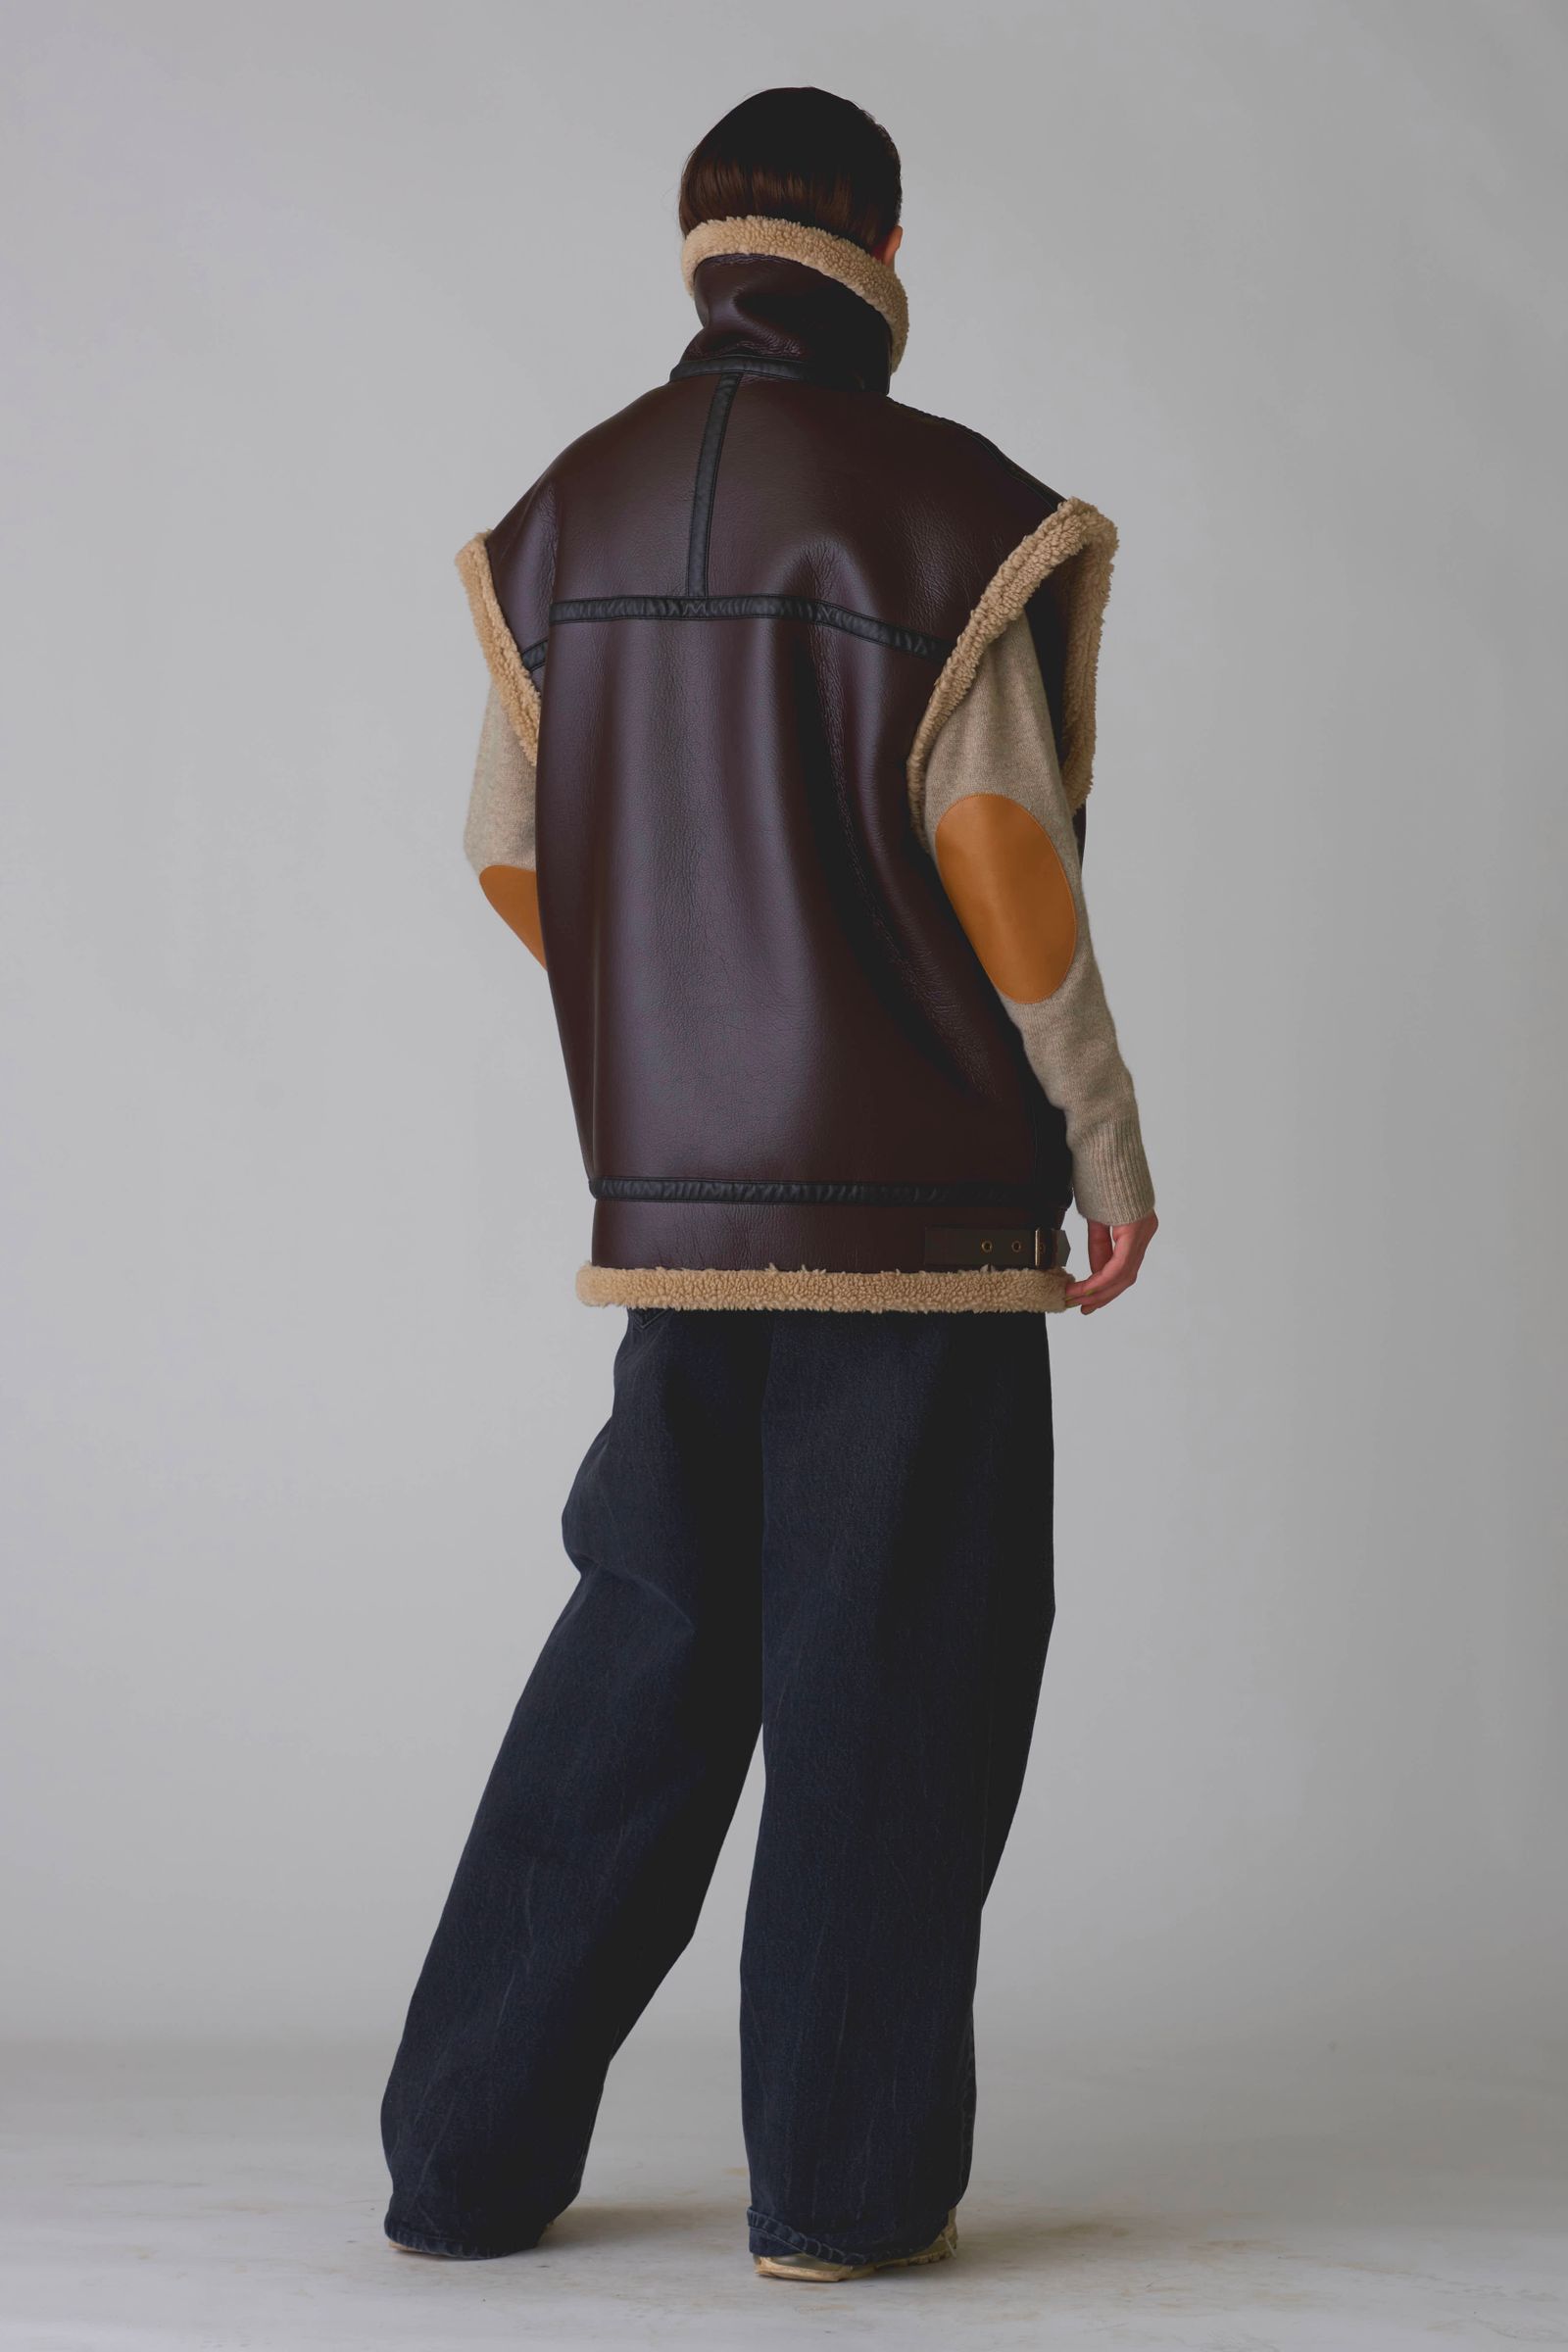 INSCRIRE - synthetic b-3 vest -brown- 22aw | asterisk